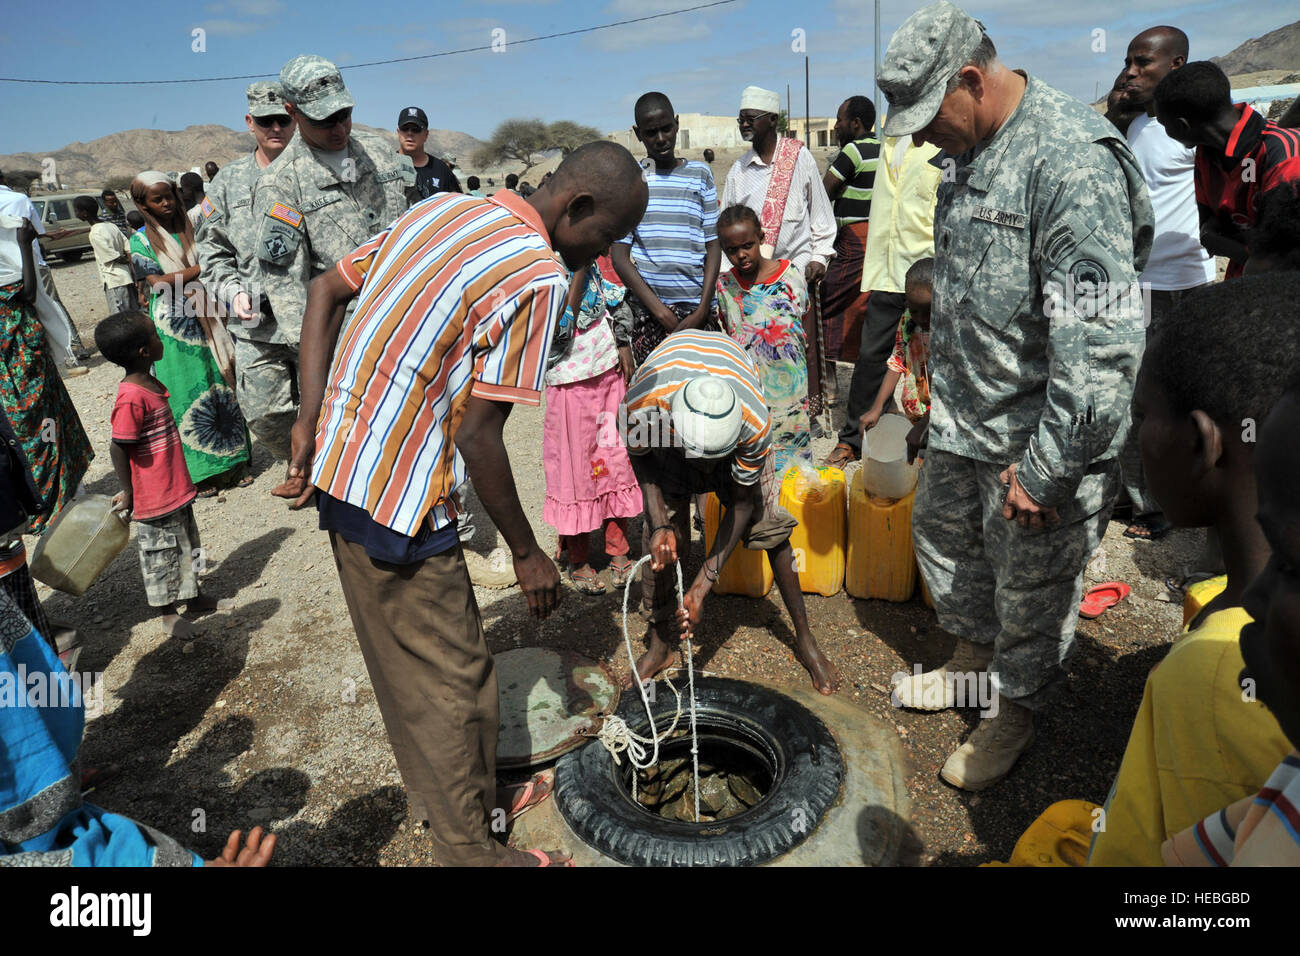 ALI ADDE, Djibouti (Feb. 9, 2012) – Villagers demonstrate how to draw water from a community well they dug by hand to U.S. Army Sergeant Major Richard Erickson, U.S. Army 257th Engineer Team here, February 9. The 257th Engineer Team, in support of Combined Joint Task Force - Horn of Africa, is visiting Ali Adde to conduct analysis of wells drilled by the U.S. military to assess their performance. Site data will help shape future water well-drilling operations. (U.S. Air Force photo by Staff Sergeant Joseph A. Araiza/Released) Stock Photo